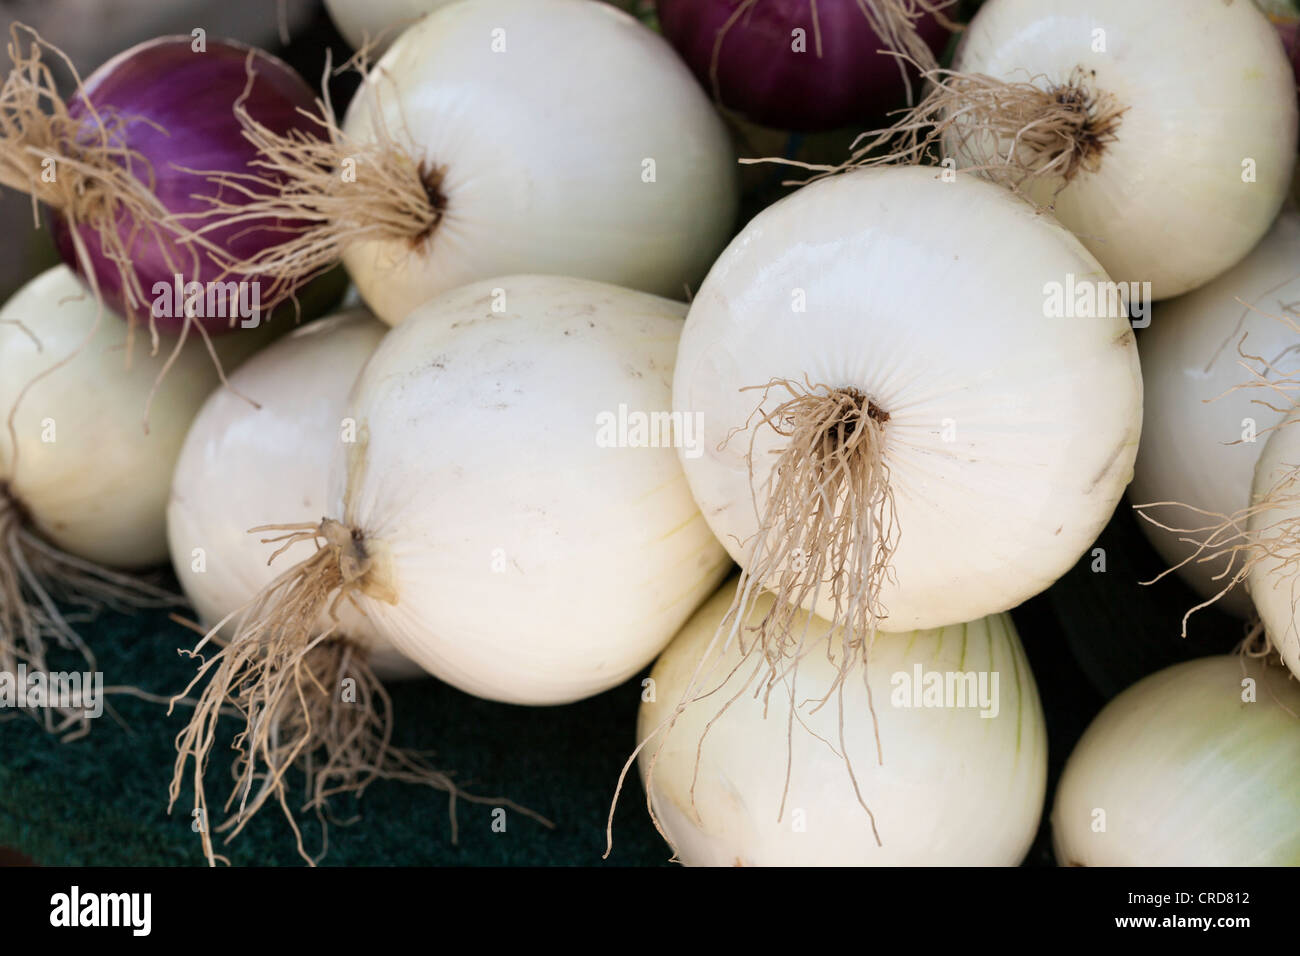 White and Red Onions. On sale at a farmer's market. Stock Photo